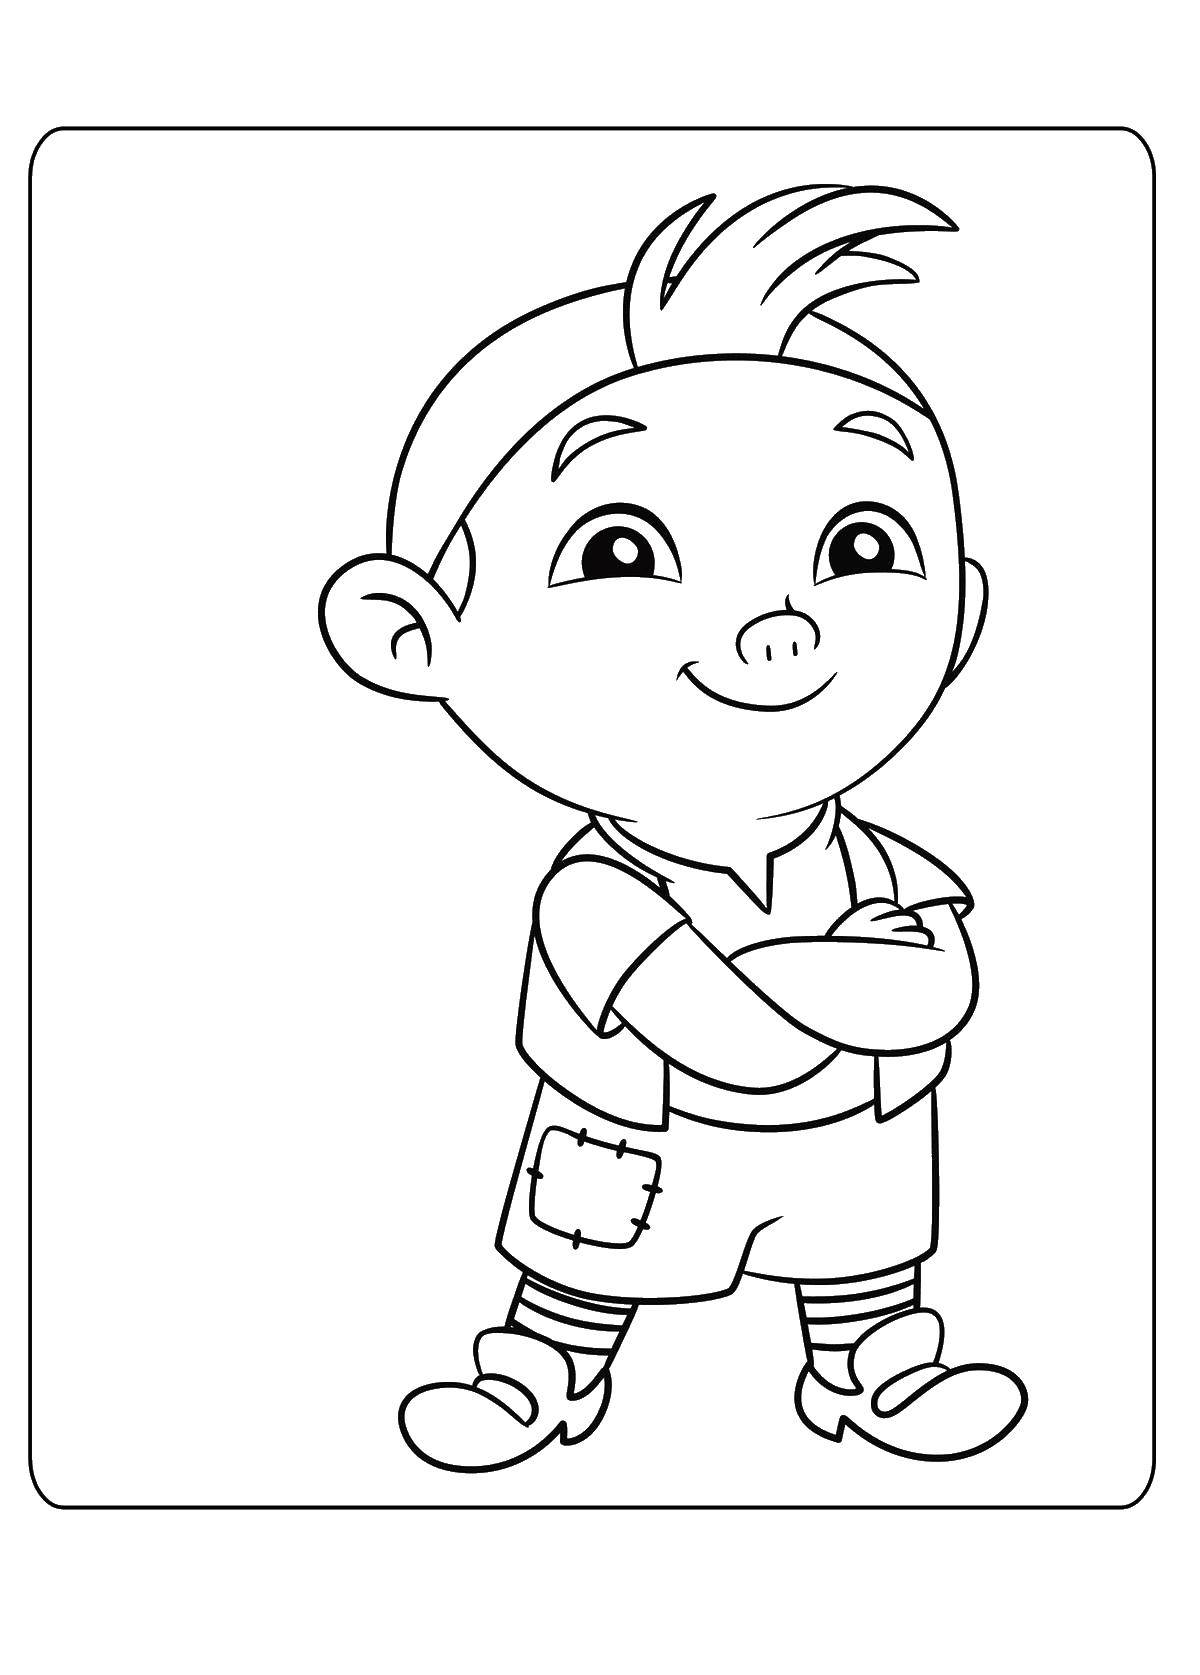 Coloring Cubby pirate. Category Jake and the pirates Netlandii. Tags:  Cubby, pirate, Jake.